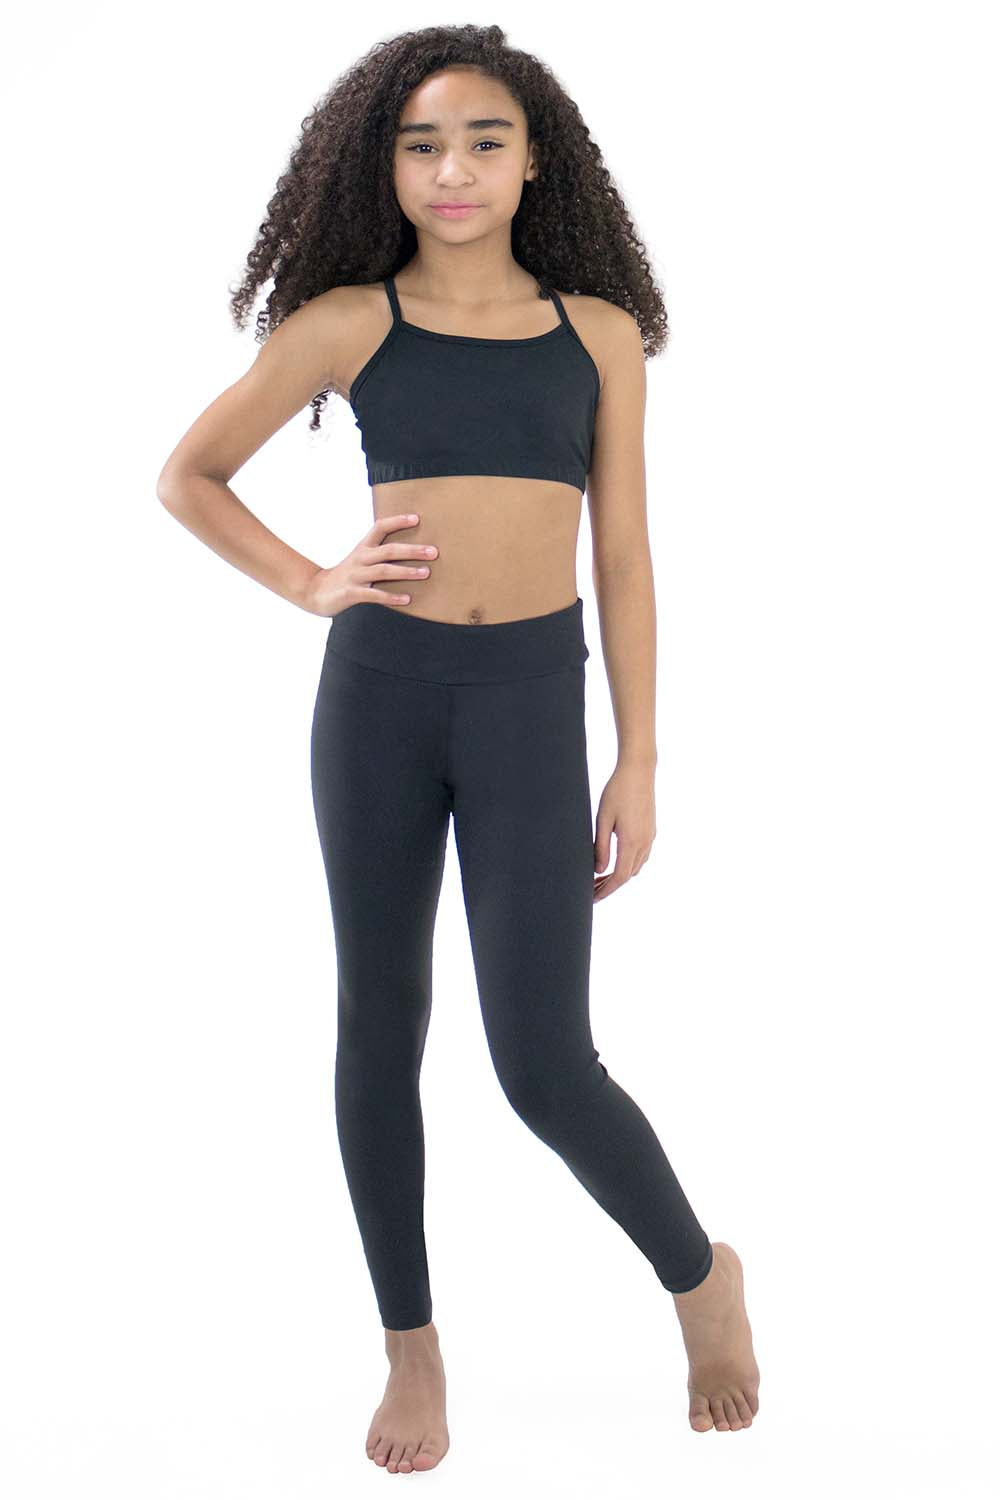 logo-waistband leggings in black - Palm Angels® Official